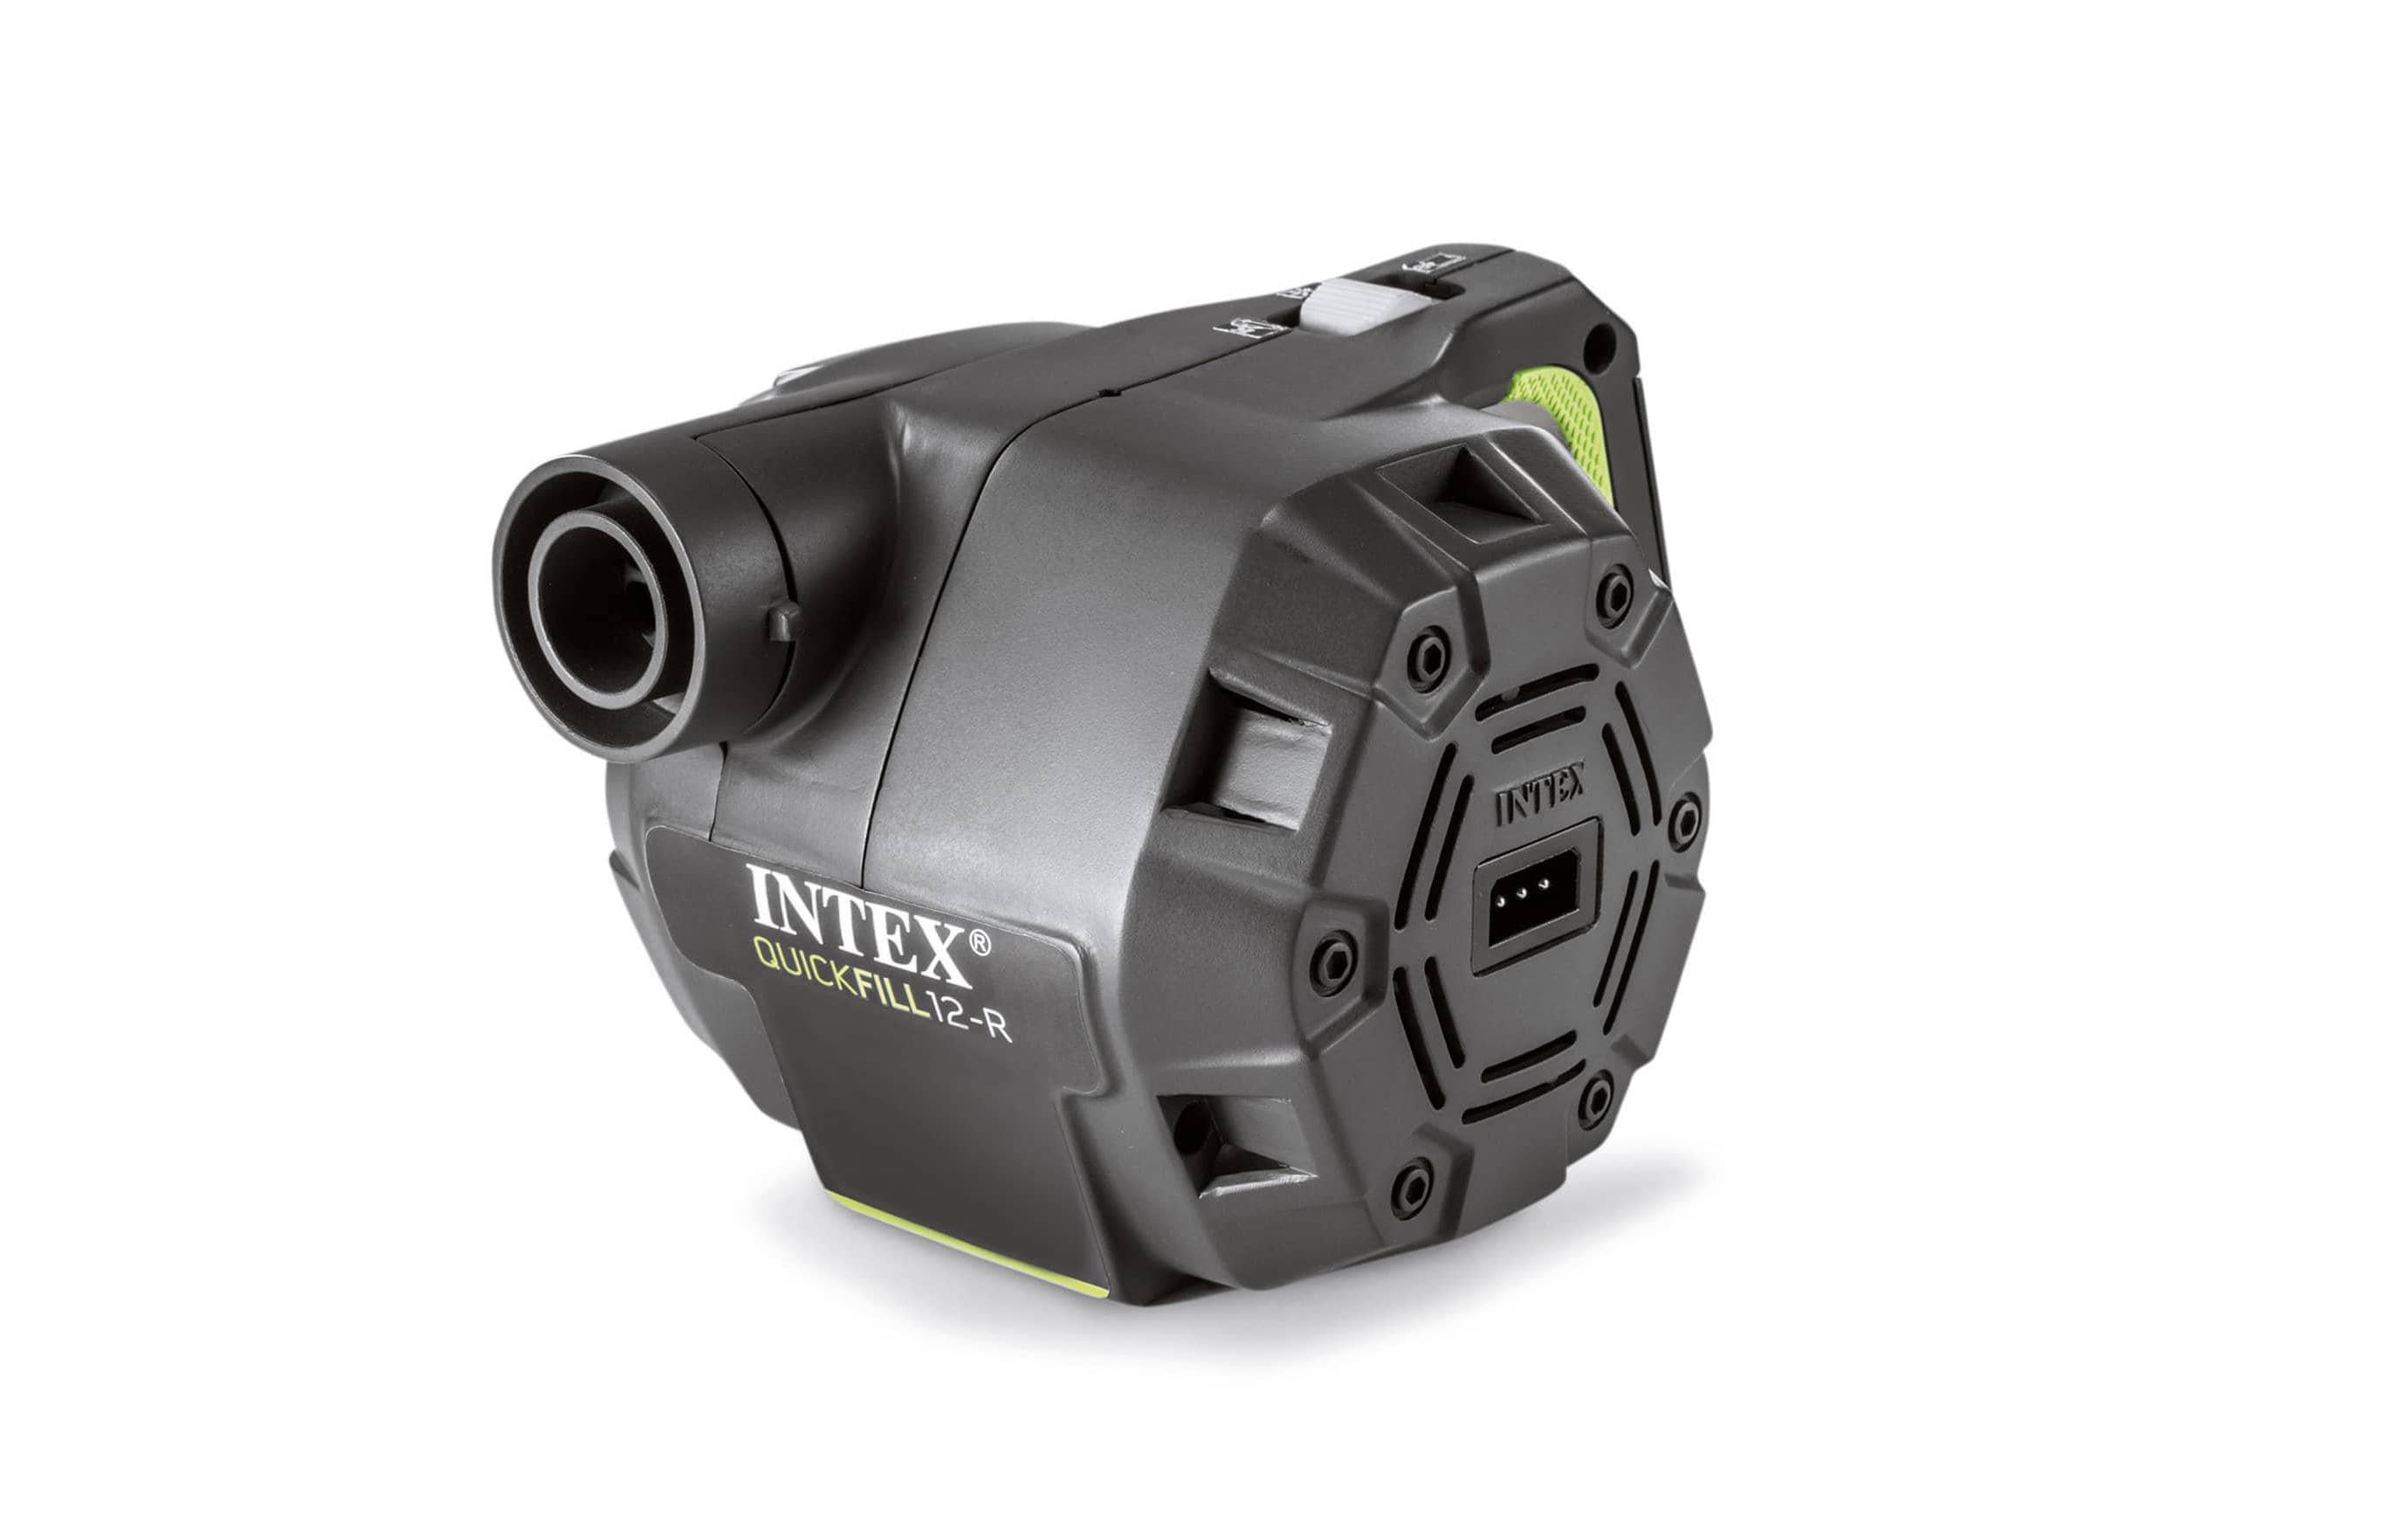 Intex Quick-Fill Rechargeable